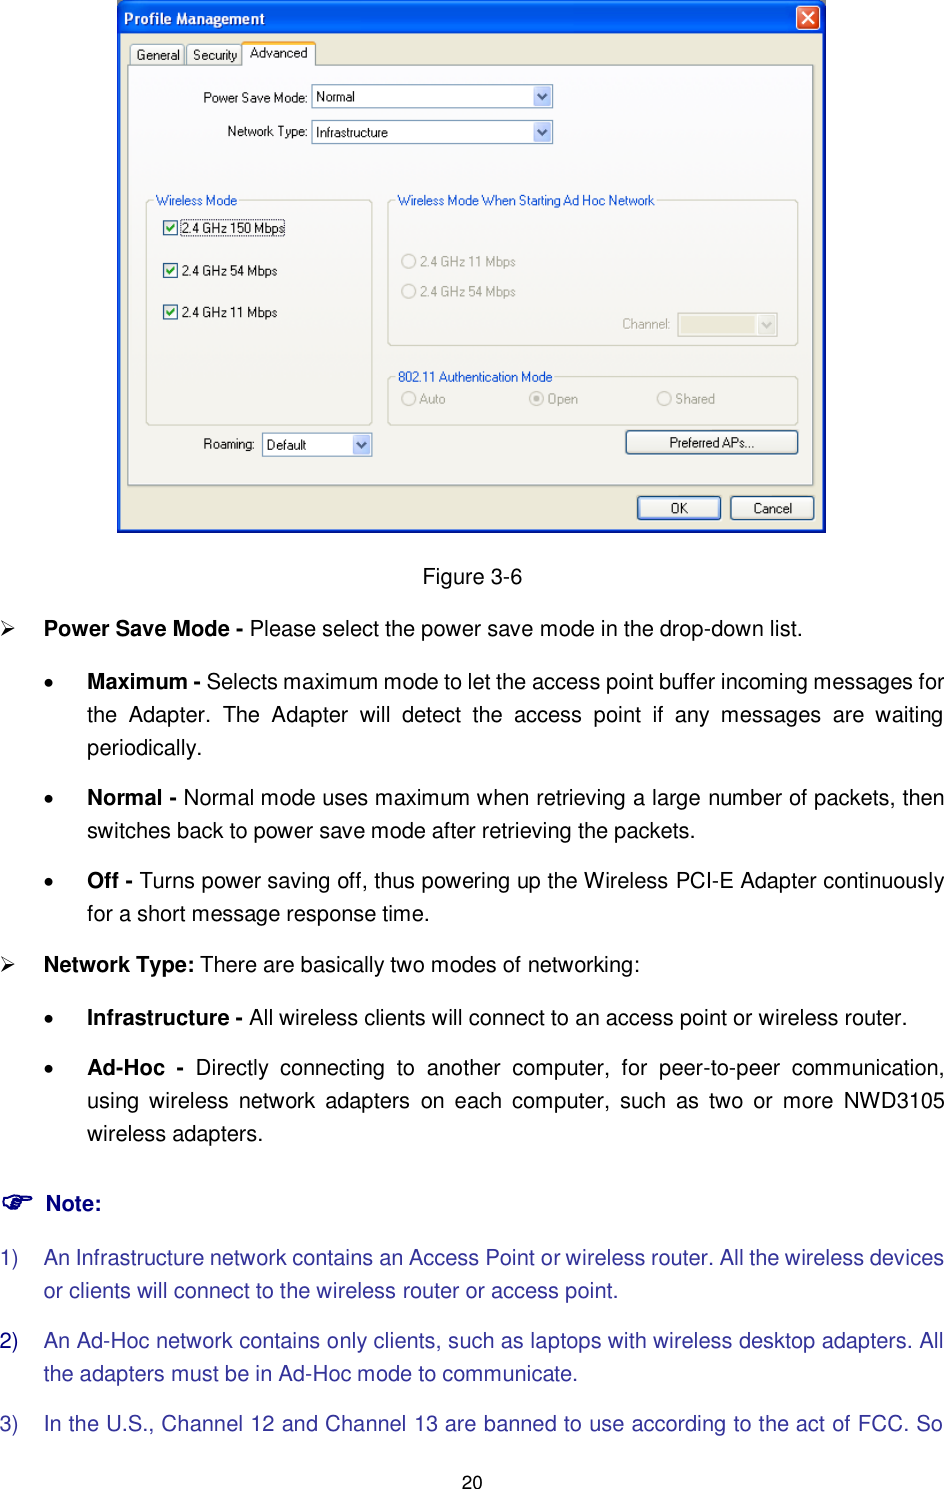  20  Figure 3-6  Power Save Mode - Please select the power save mode in the drop-down list.  Maximum - Selects maximum mode to let the access point buffer incoming messages for the  Adapter.  The  Adapter  will  detect  the  access  point  if  any  messages  are  waiting periodically.  Normal - Normal mode uses maximum when retrieving a large number of packets, then switches back to power save mode after retrieving the packets.  Off - Turns power saving off, thus powering up the Wireless PCI-E Adapter continuously for a short message response time.  Network Type: There are basically two modes of networking:  Infrastructure - All wireless clients will connect to an access point or wireless router.  Ad-Hoc -  Directly  connecting  to  another  computer,  for  peer-to-peer  communication, using wireless  network  adapters  on  each  computer,  such  as  two  or  more  NWD3105 wireless adapters.  Note: 1)  An Infrastructure network contains an Access Point or wireless router. All the wireless devices or clients will connect to the wireless router or access point. 2) An Ad-Hoc network contains only clients, such as laptops with wireless desktop adapters. All the adapters must be in Ad-Hoc mode to communicate. 3)  In the U.S., Channel 12 and Channel 13 are banned to use according to the act of FCC. So 